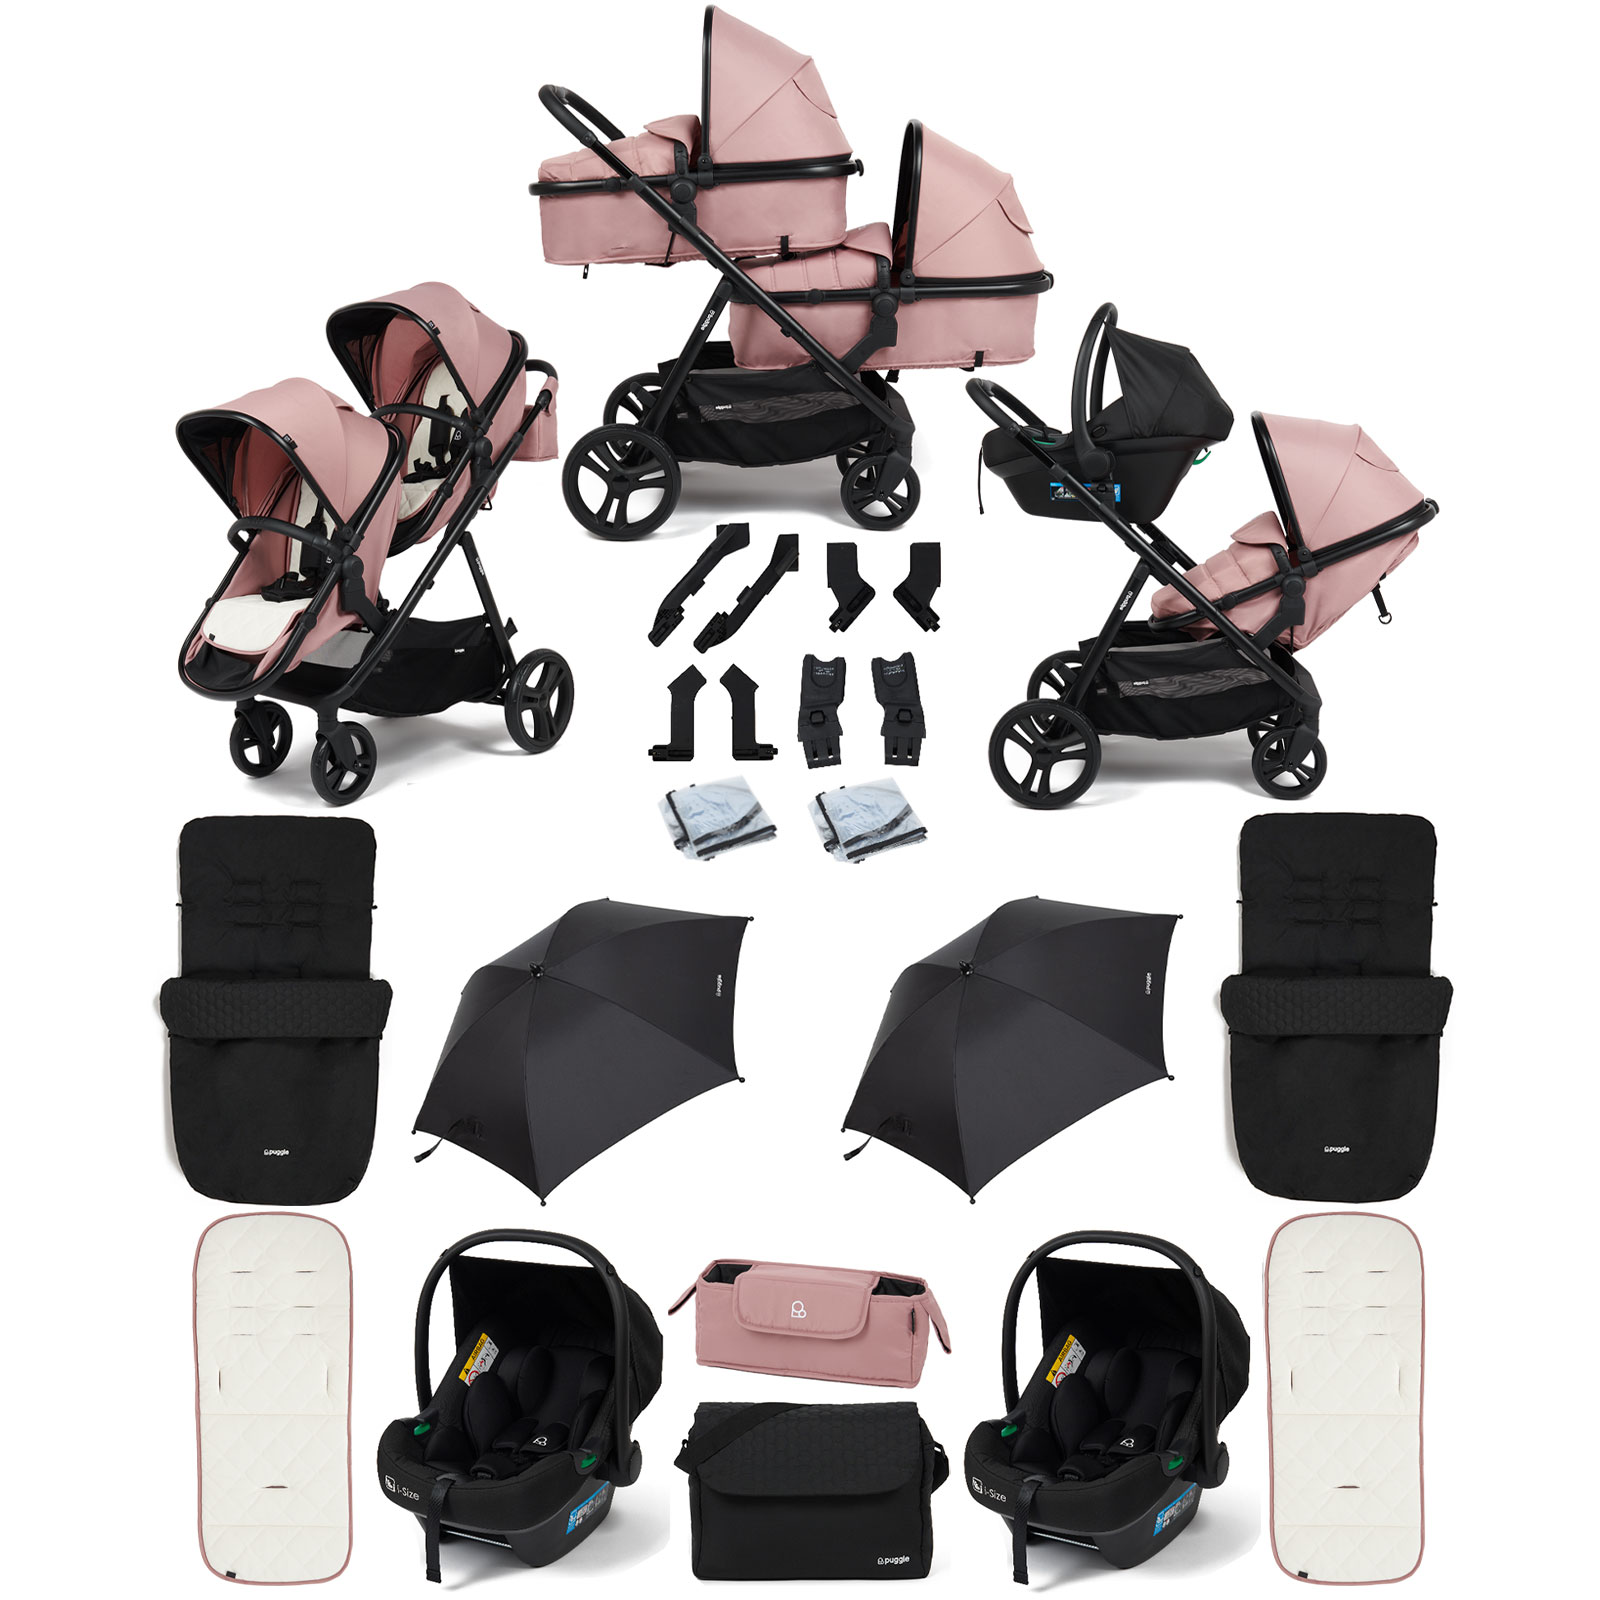 Puggle Memphis 2-in-1 Duo Double Travel System with 2 i-Size Car Seats, 2 Footmuffs, 2 Parasols, and Changing Bag - Dusk Pink